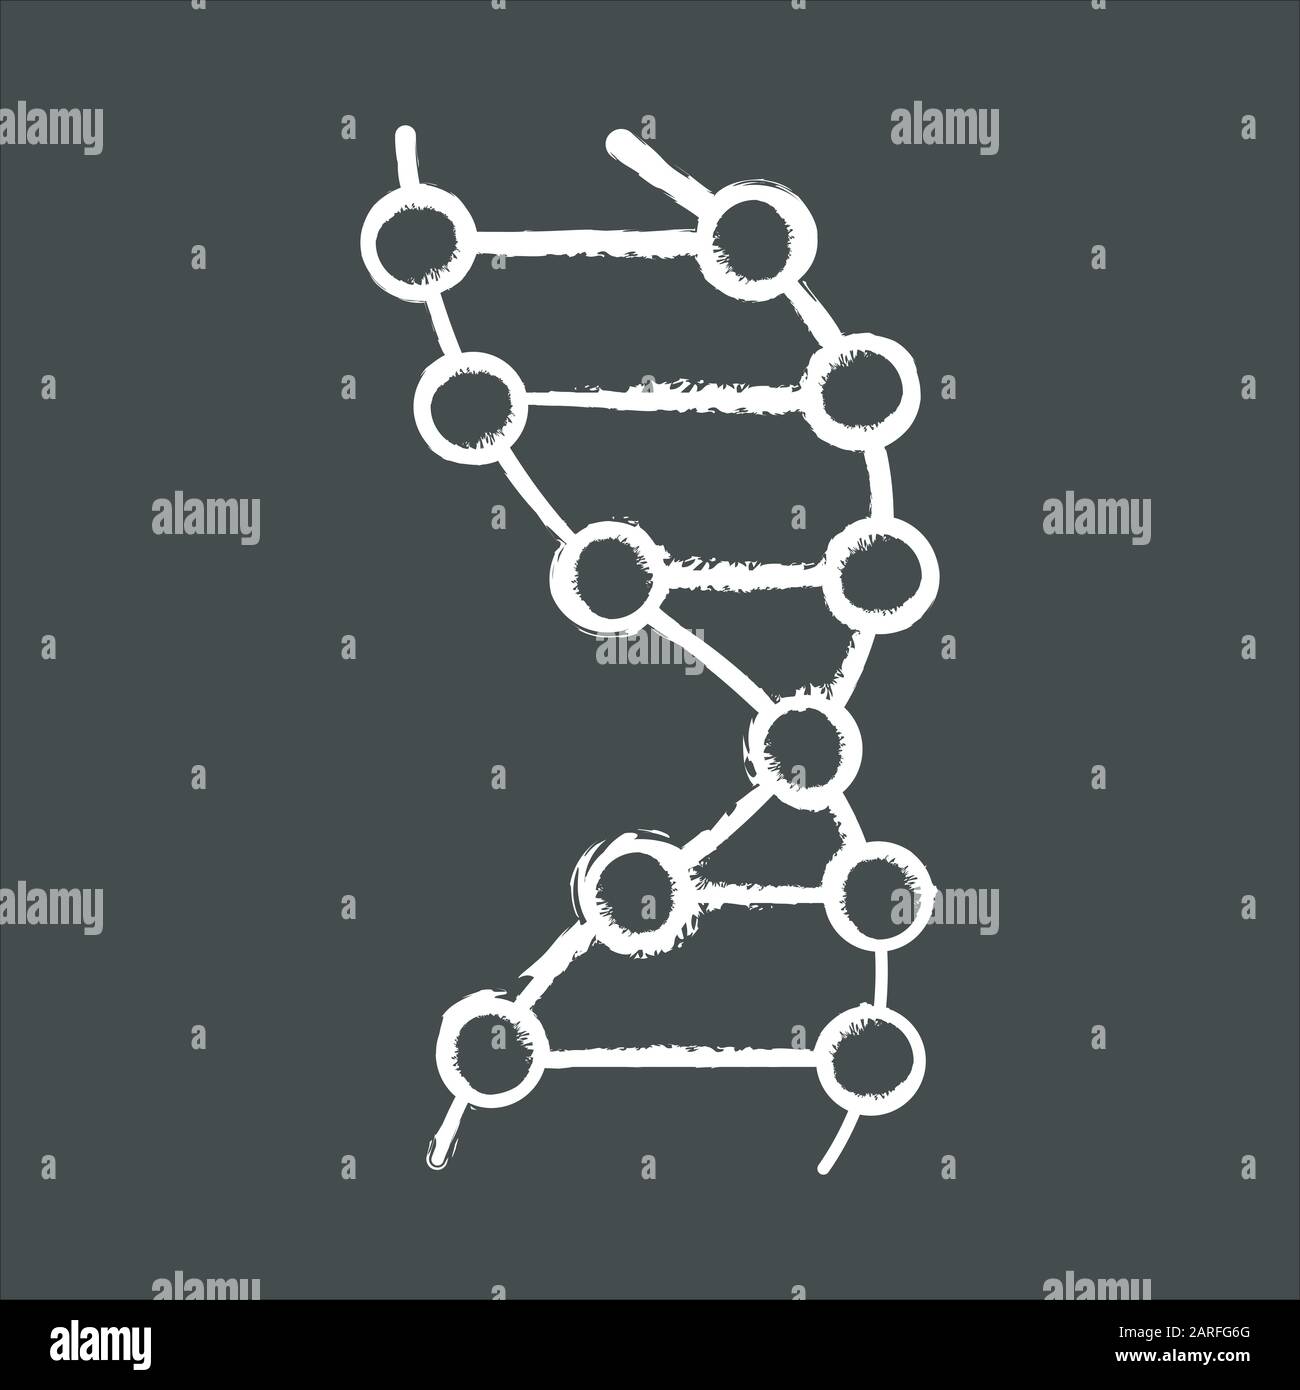 DNA helix chalk icon. Z-DNA. Connected dots, lines. Deoxyribonucleic, nucleic acid. Spiral strands. Chromosome. Molecular biology. Genetic code. Genet Stock Vector